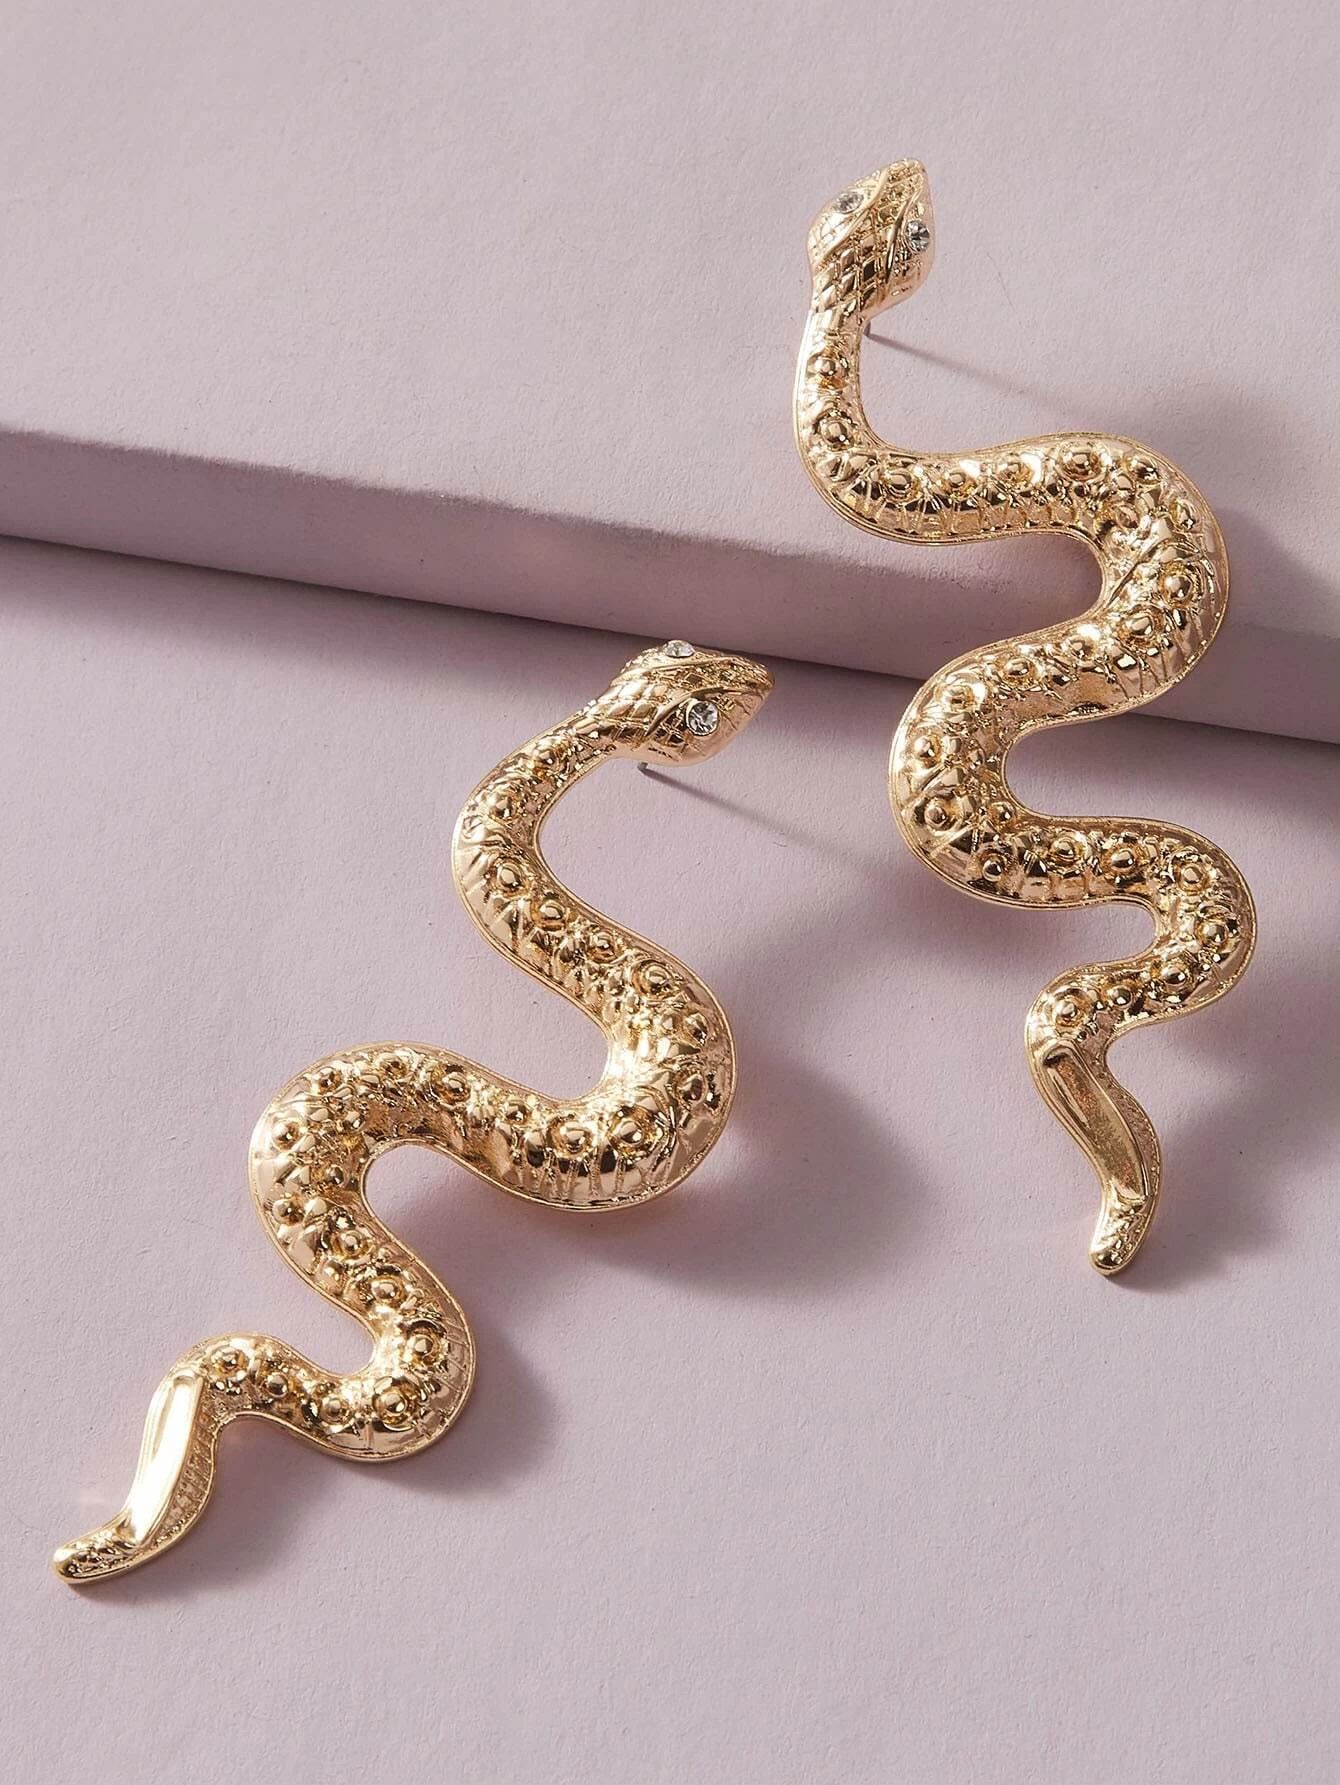 1pair Textured Snake Shaped Earrings | SHEIN